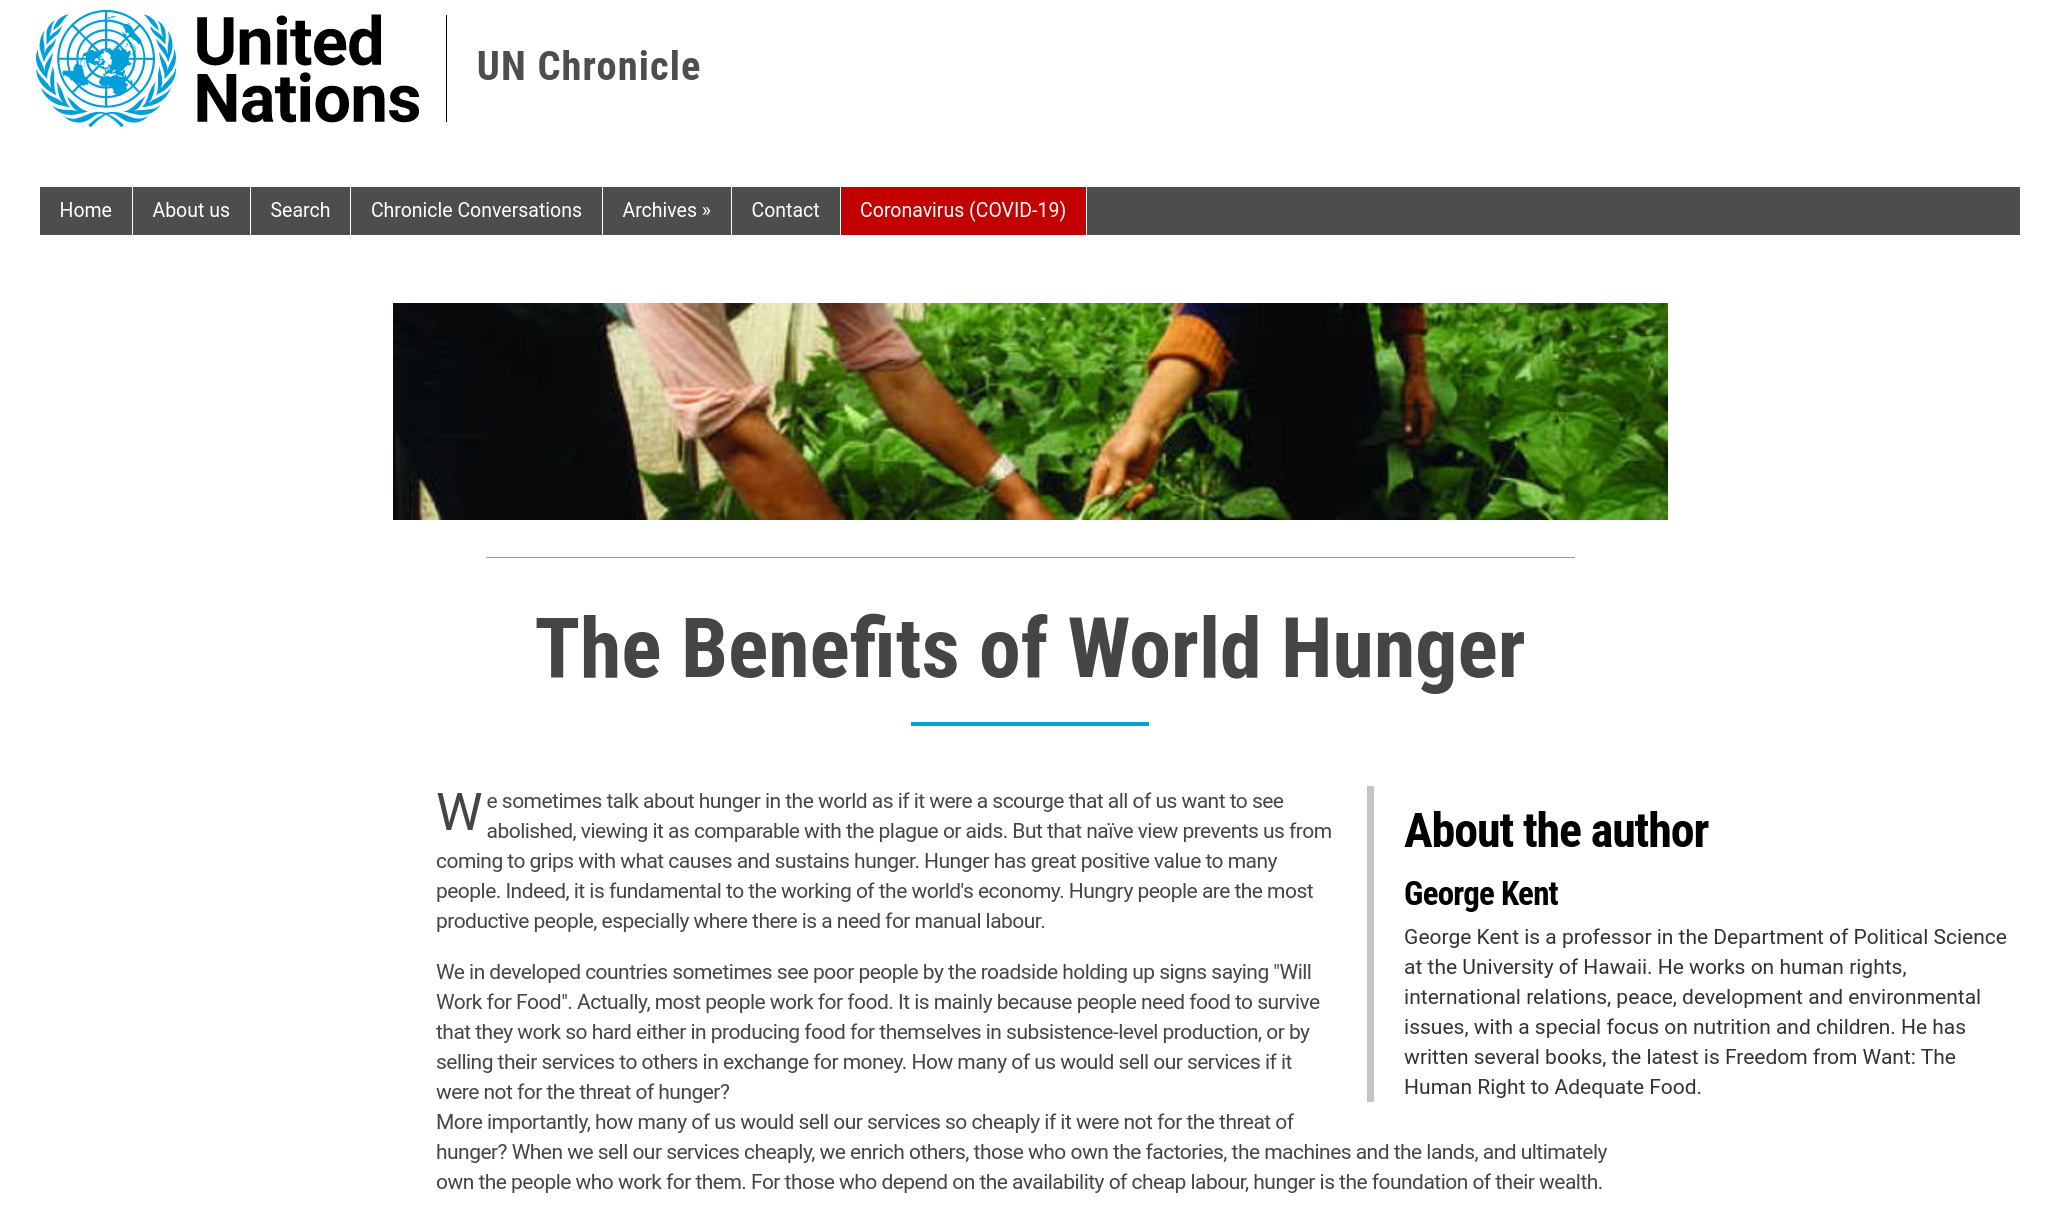 UN journal touts ‘The Benefits of World Hunger’ – ‘Hunger has great positive value…Hungry people are the most productive people’ – UN deletes essay after outcry